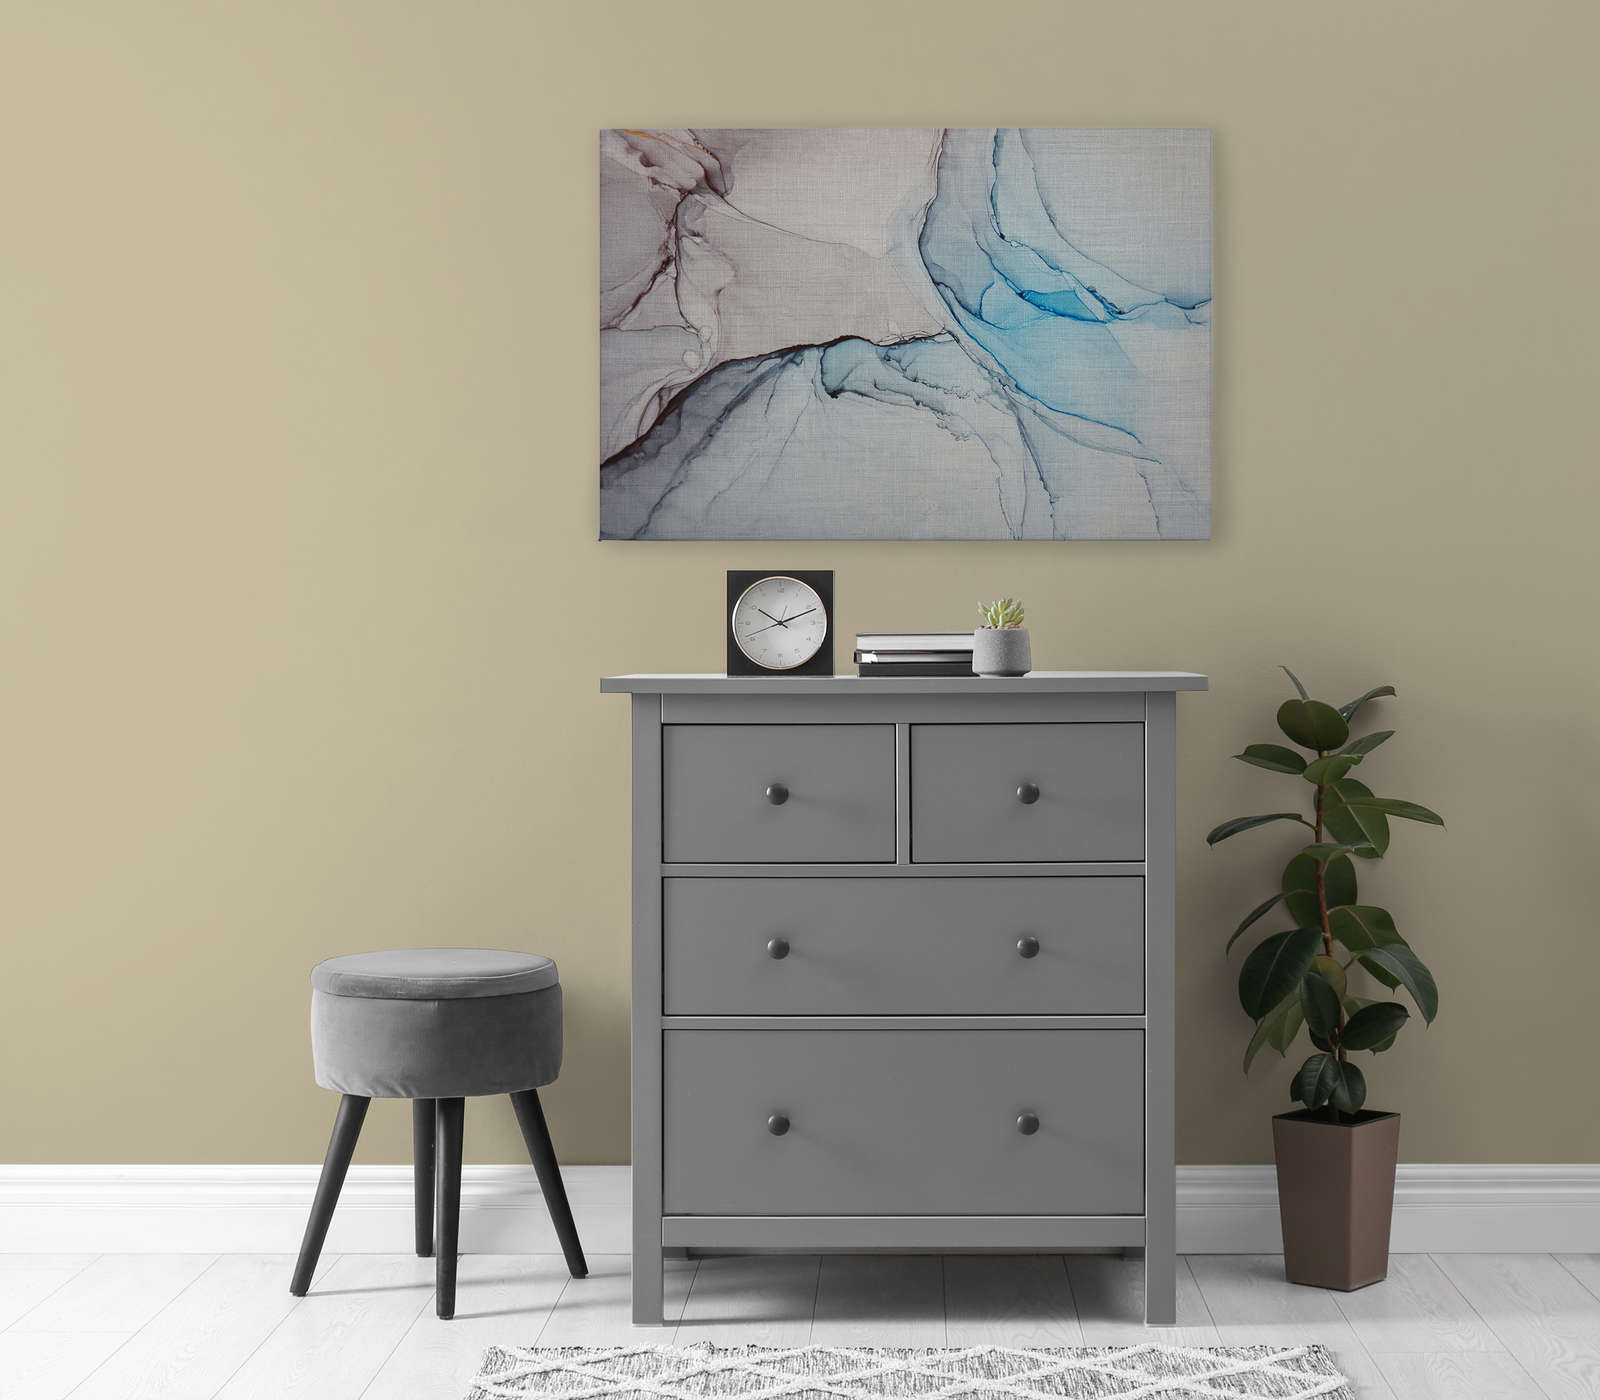             Canvas painting with marble pattern in linen look - 0.90 m x 0.60 m
        